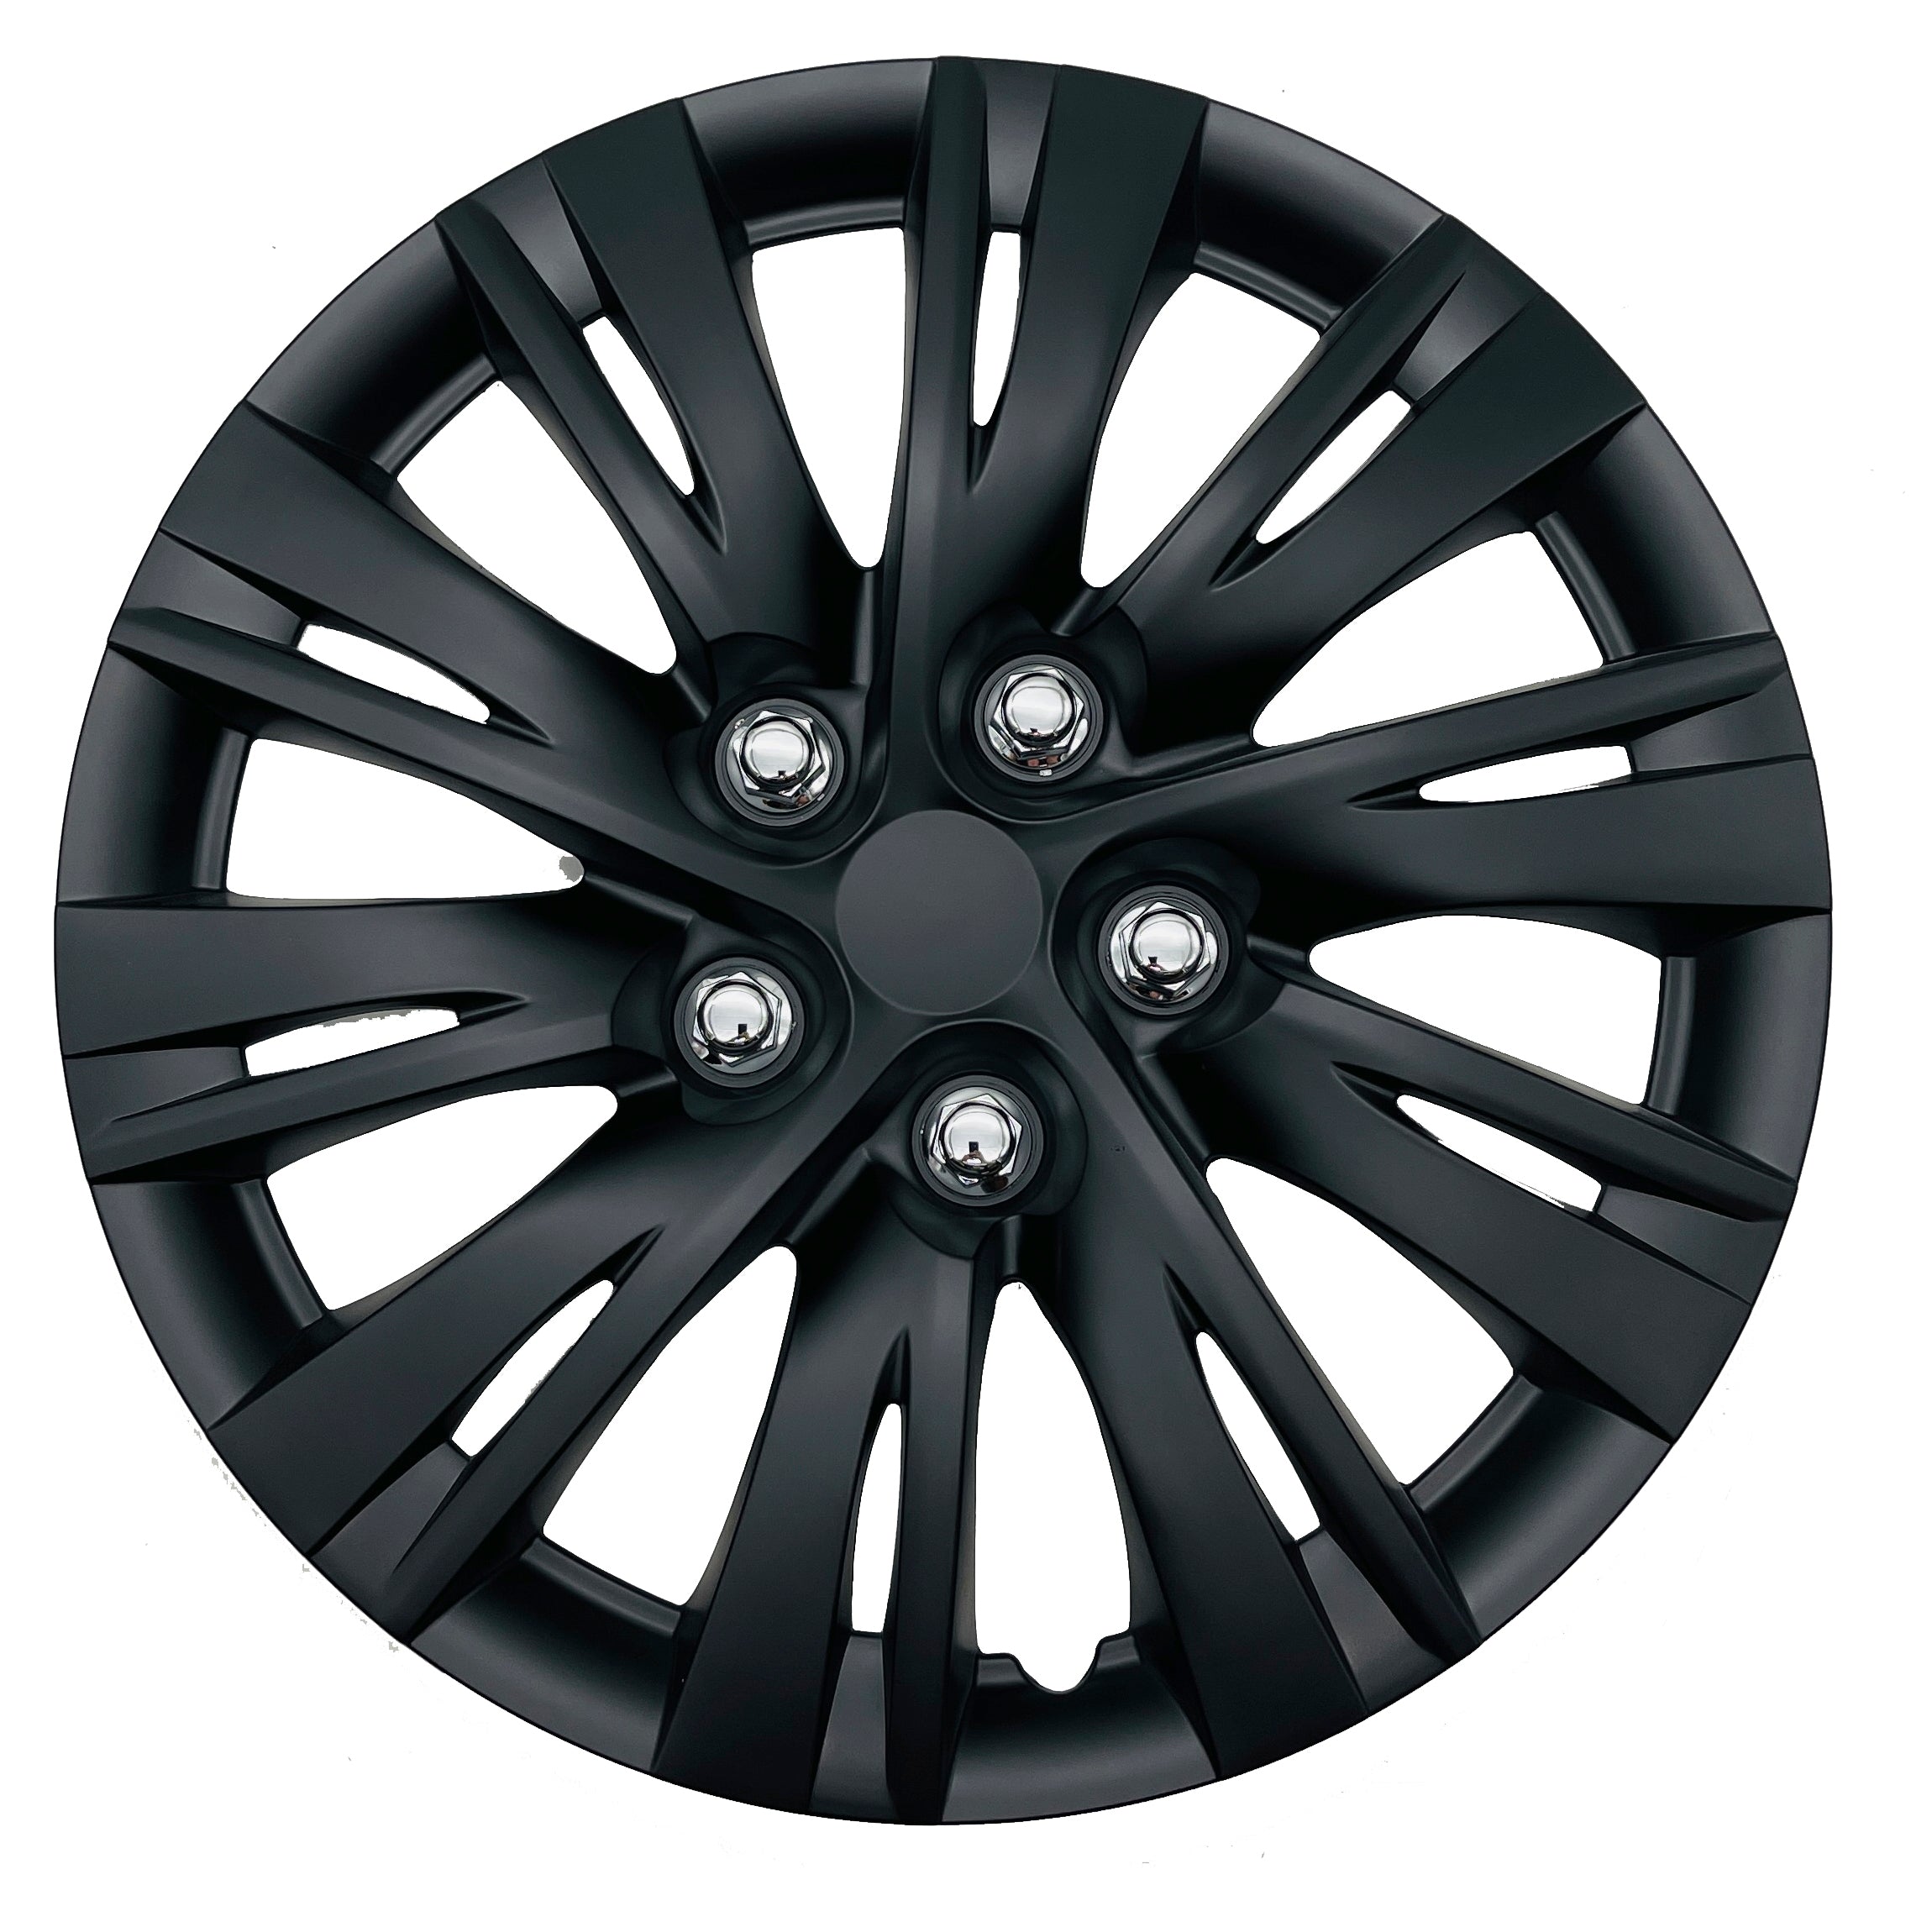 MWC 446552 Hubcaps Wheel Covers 16 inch 4 Set Matte-Black